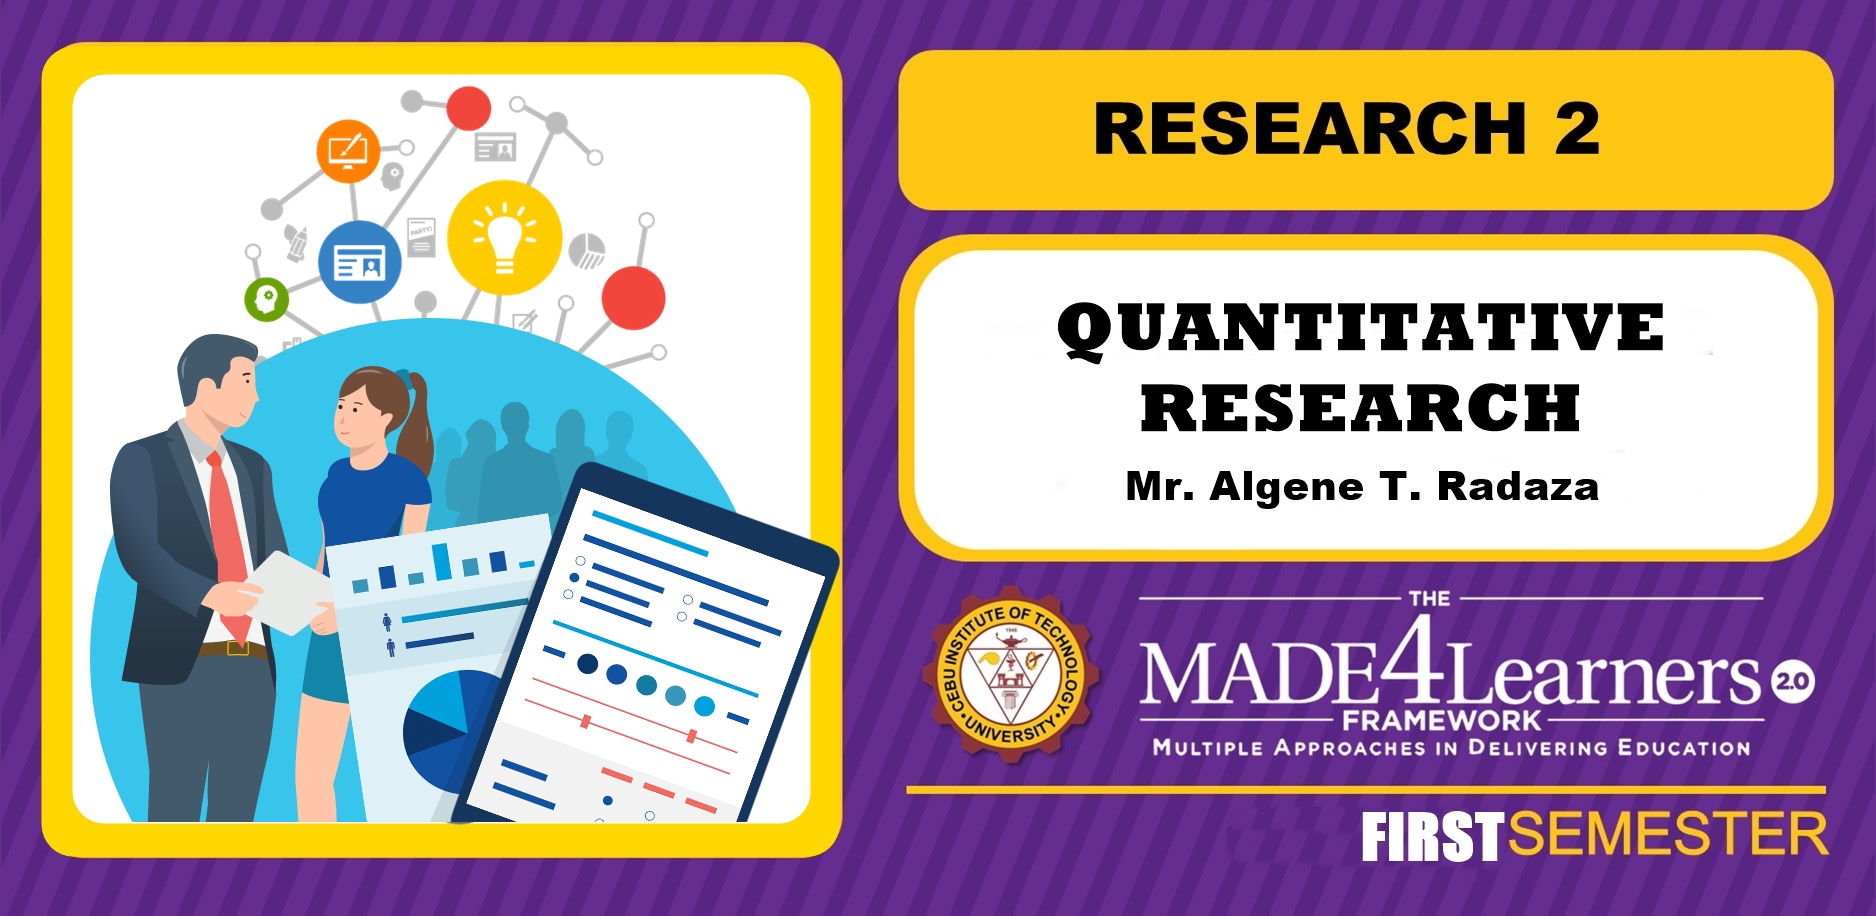 RES2: Practical Research 2 (Radaza)